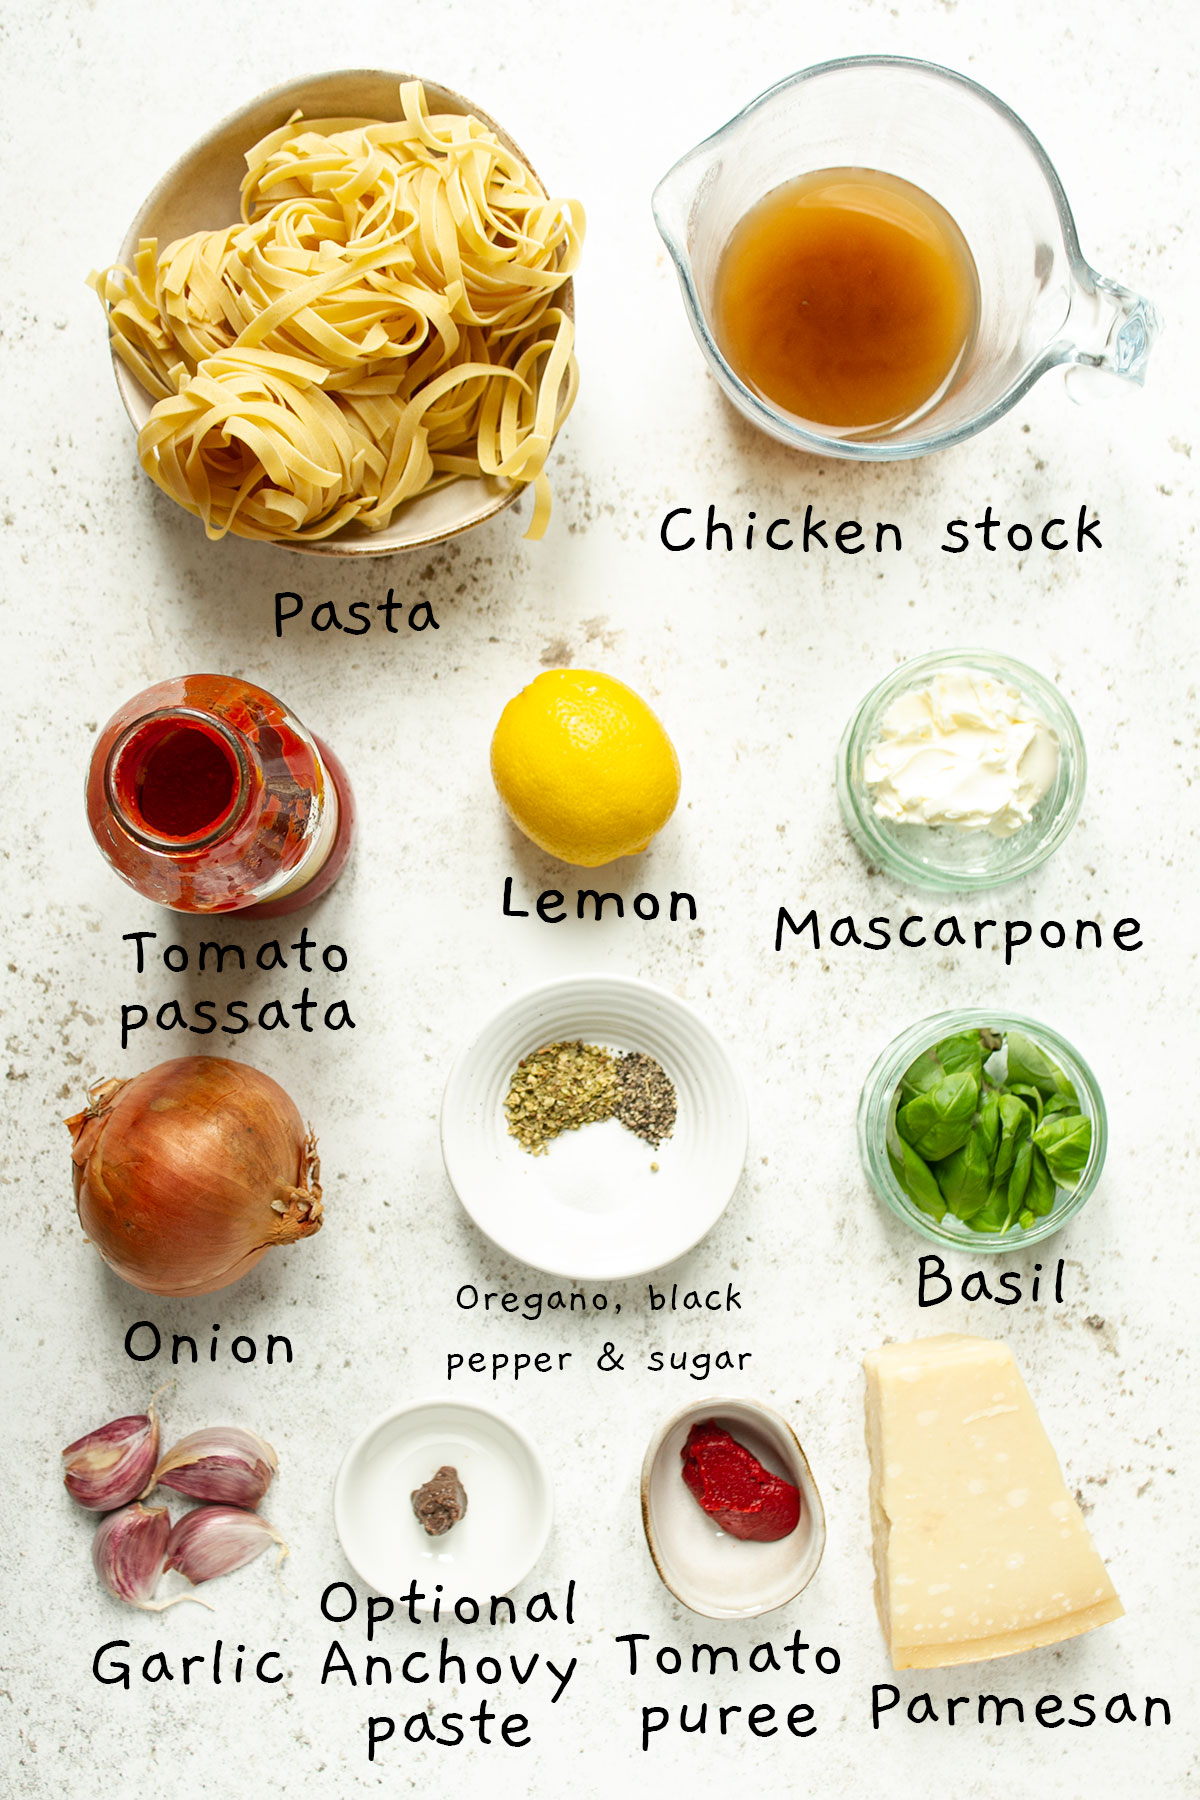 A photograph of the ingredients.